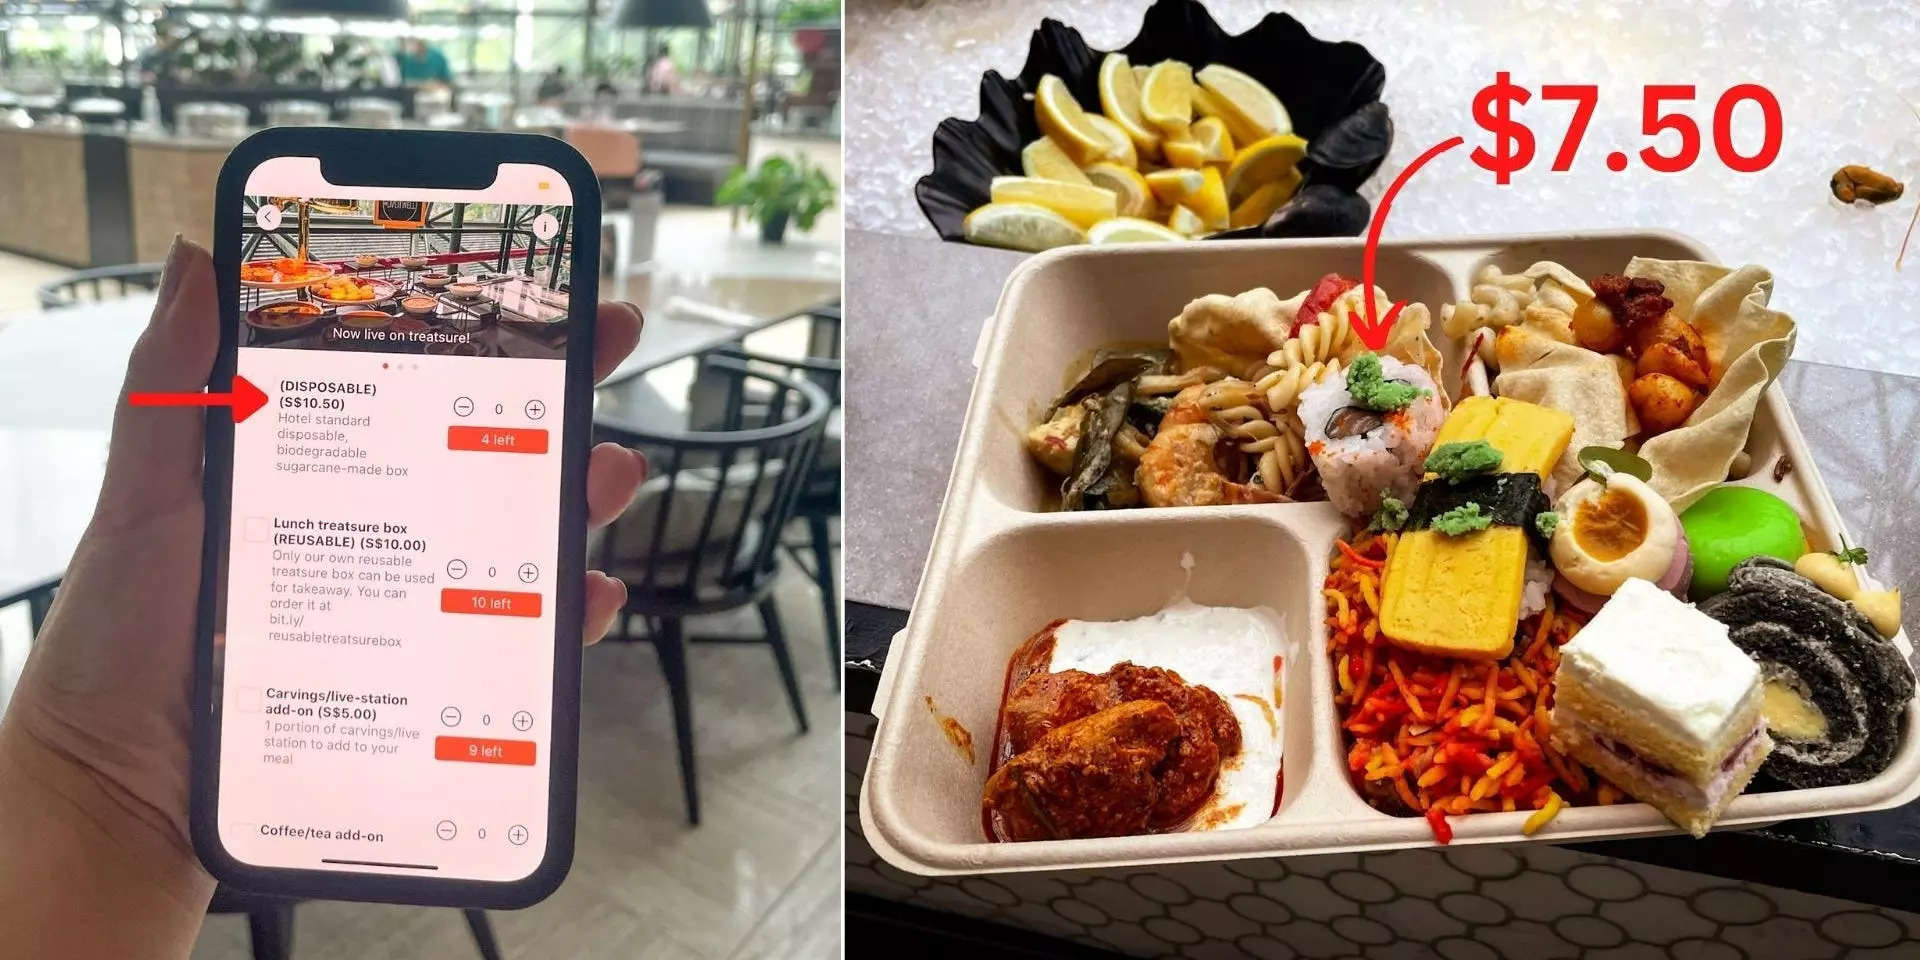 A Singapore company charges you $7.50 to eat leftovers from high-end hotel buffets. I put it to the test.